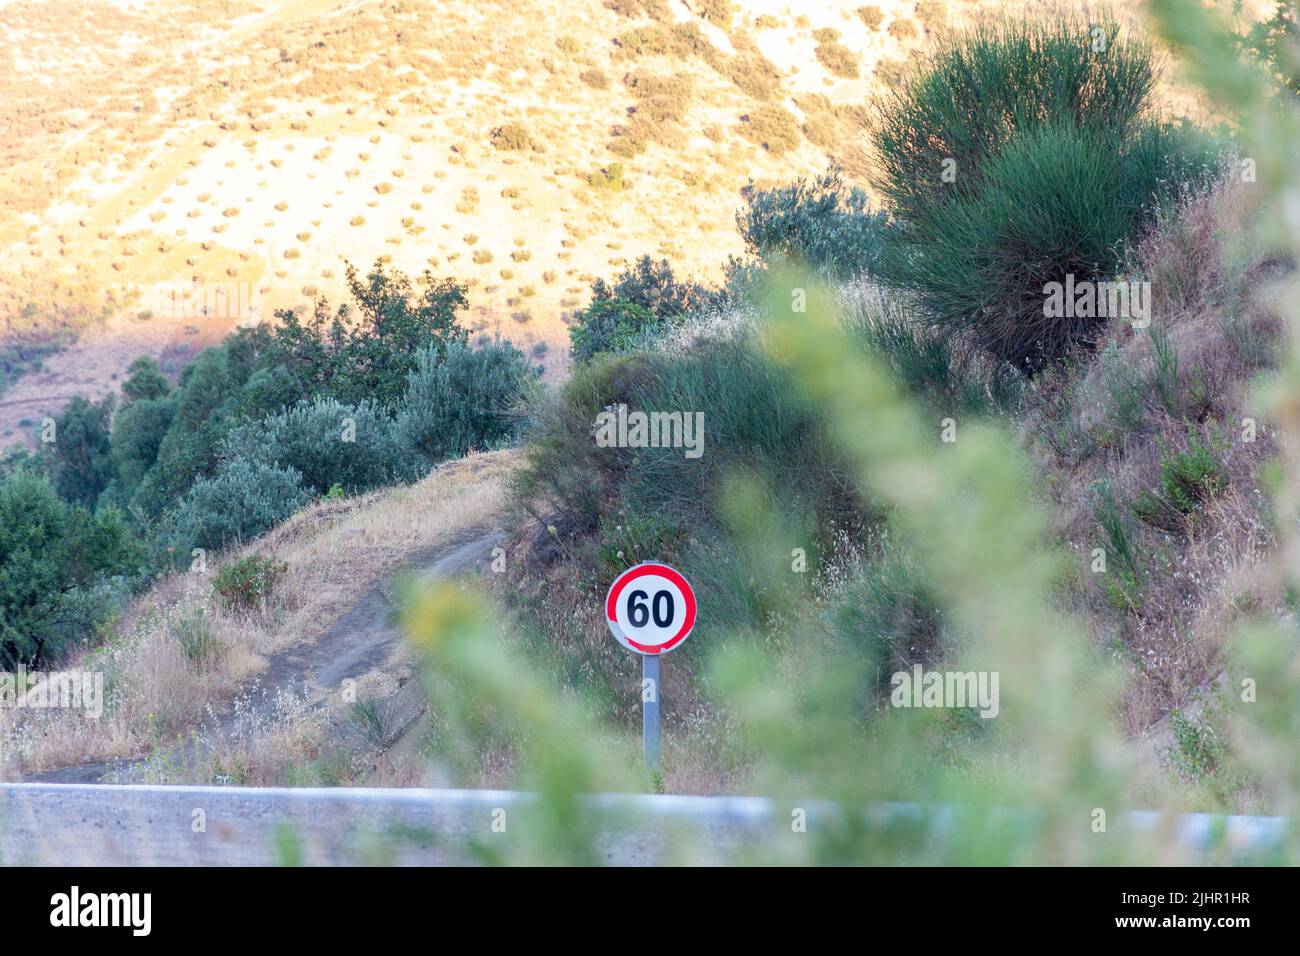 View of a traffic sign with a speed limit of 60 kilometers per hour on a countryside road. Stock Photo